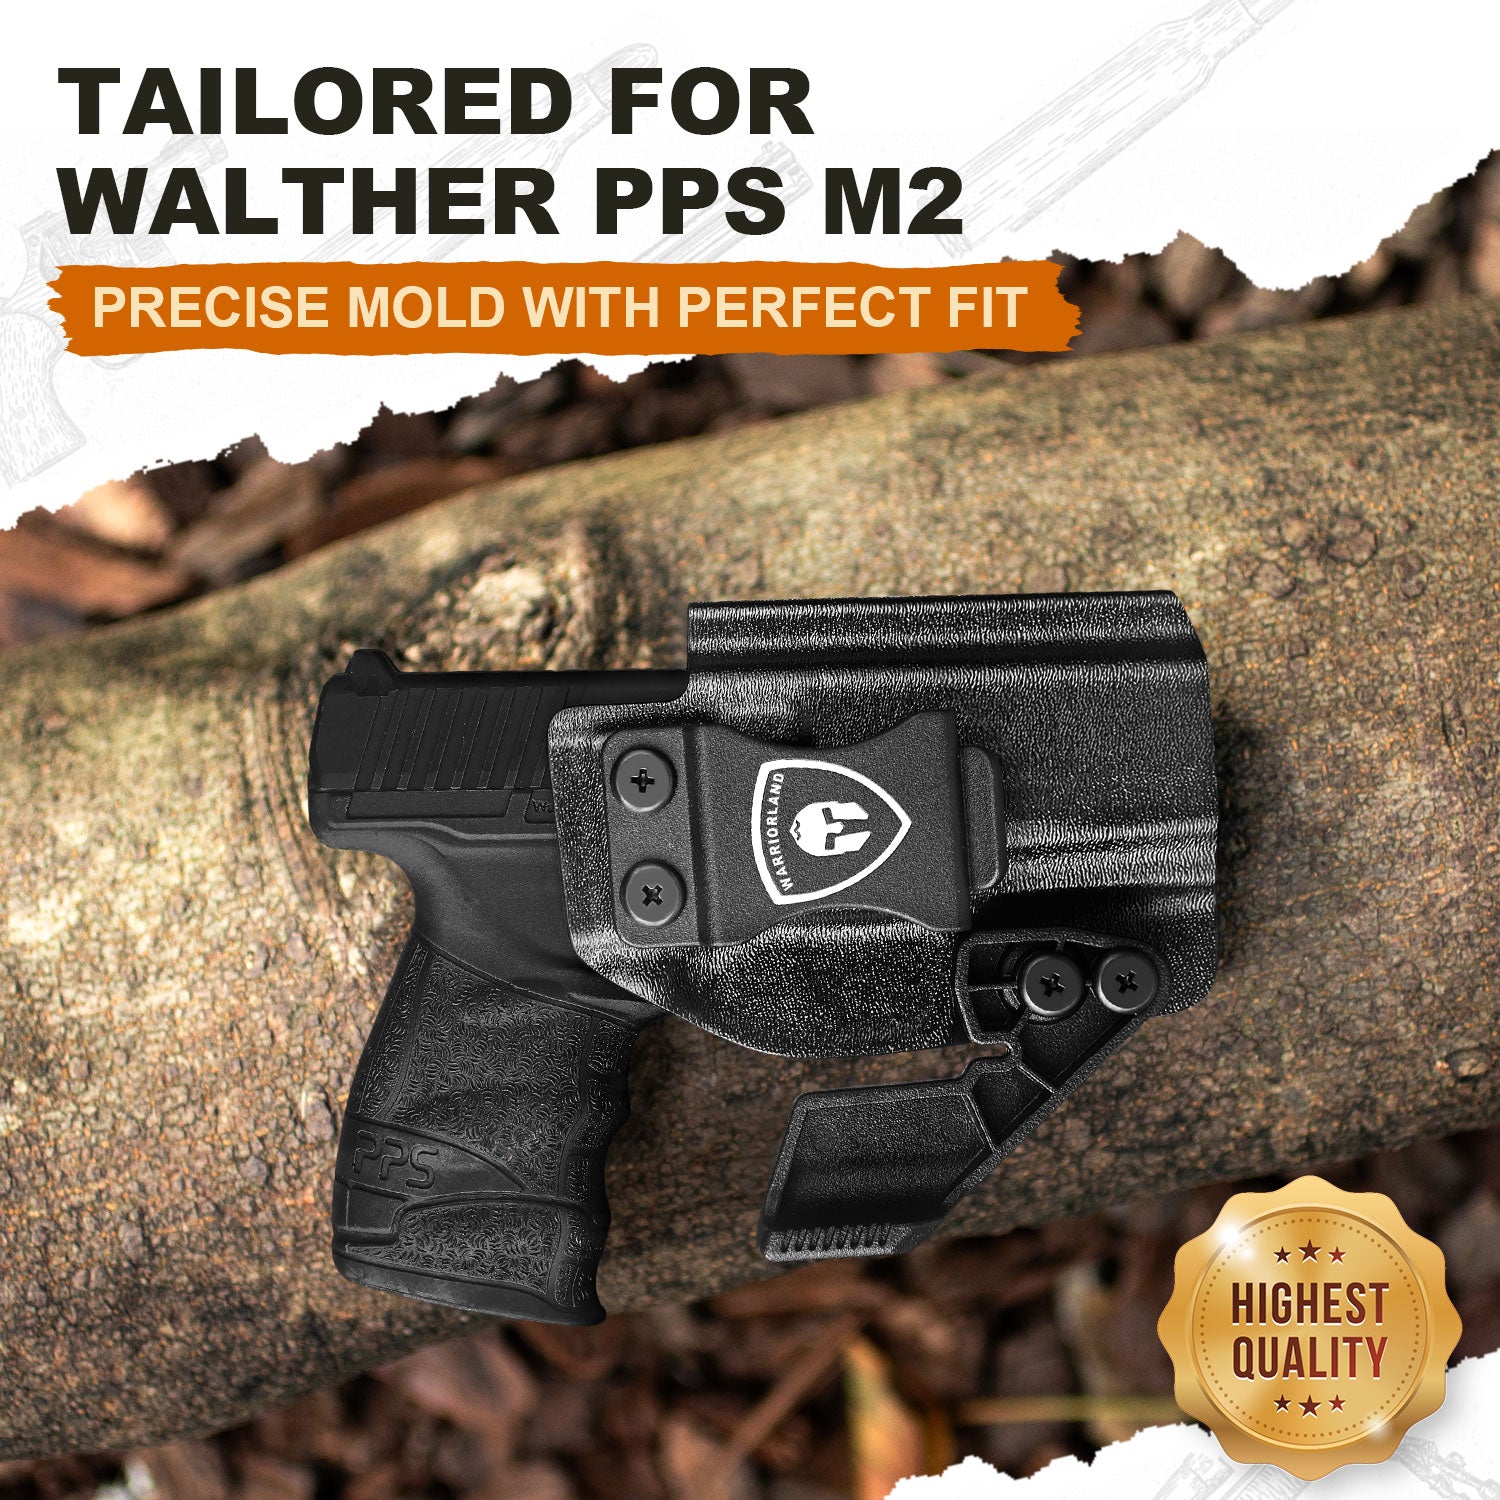 Walther PPS M2 Holster IWB Kydex Holster w/Claw & Optics Cut: Walther PPS M2 Pistol, Inside Waistband Appendix Carry PPS M2 Holster, Adj. Retention & Cant, Right Hand|WARRIORLAND